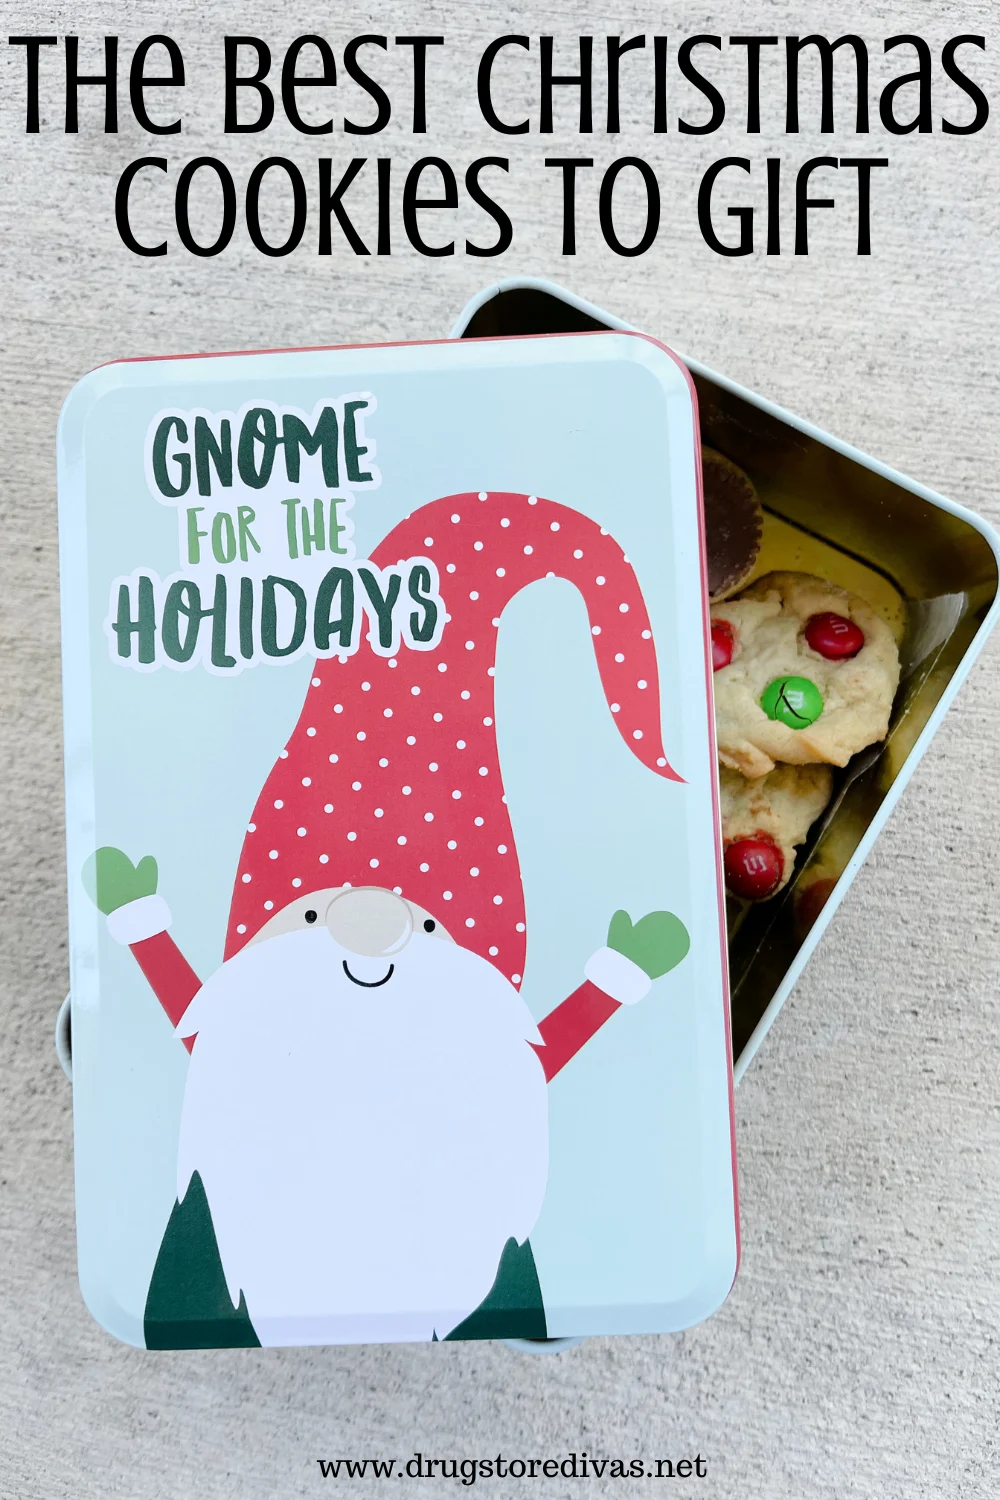 A metal box with a gnome on the front and cookies inside with the words 